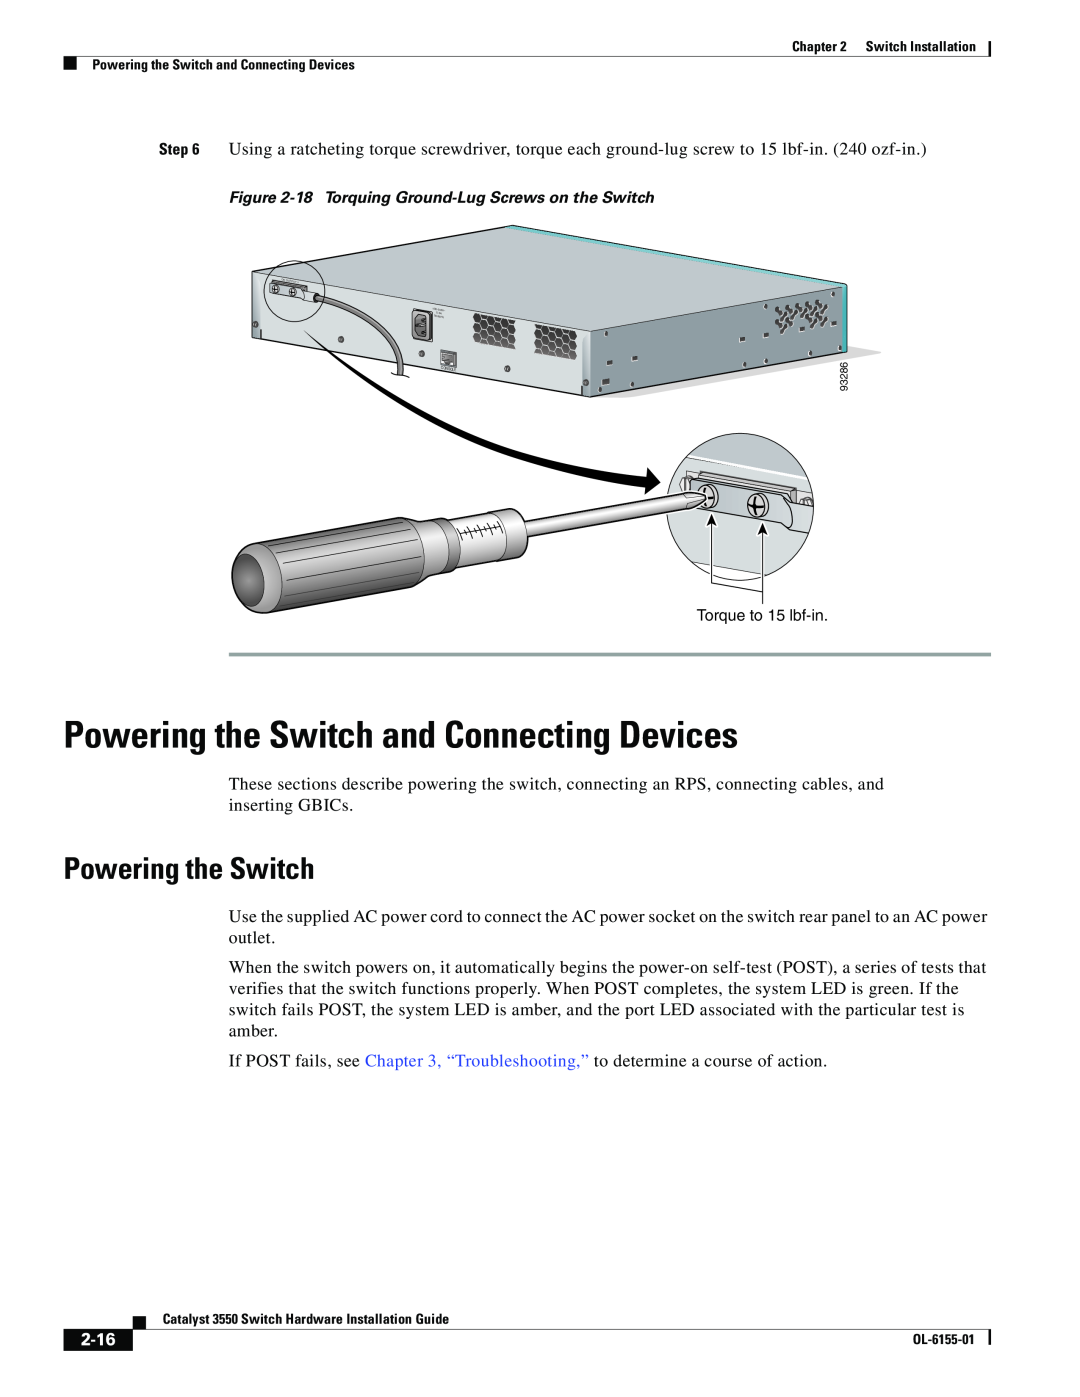 Cisco Systems 3550 manual Powering the Switch and Connecting Devices, 2-16 